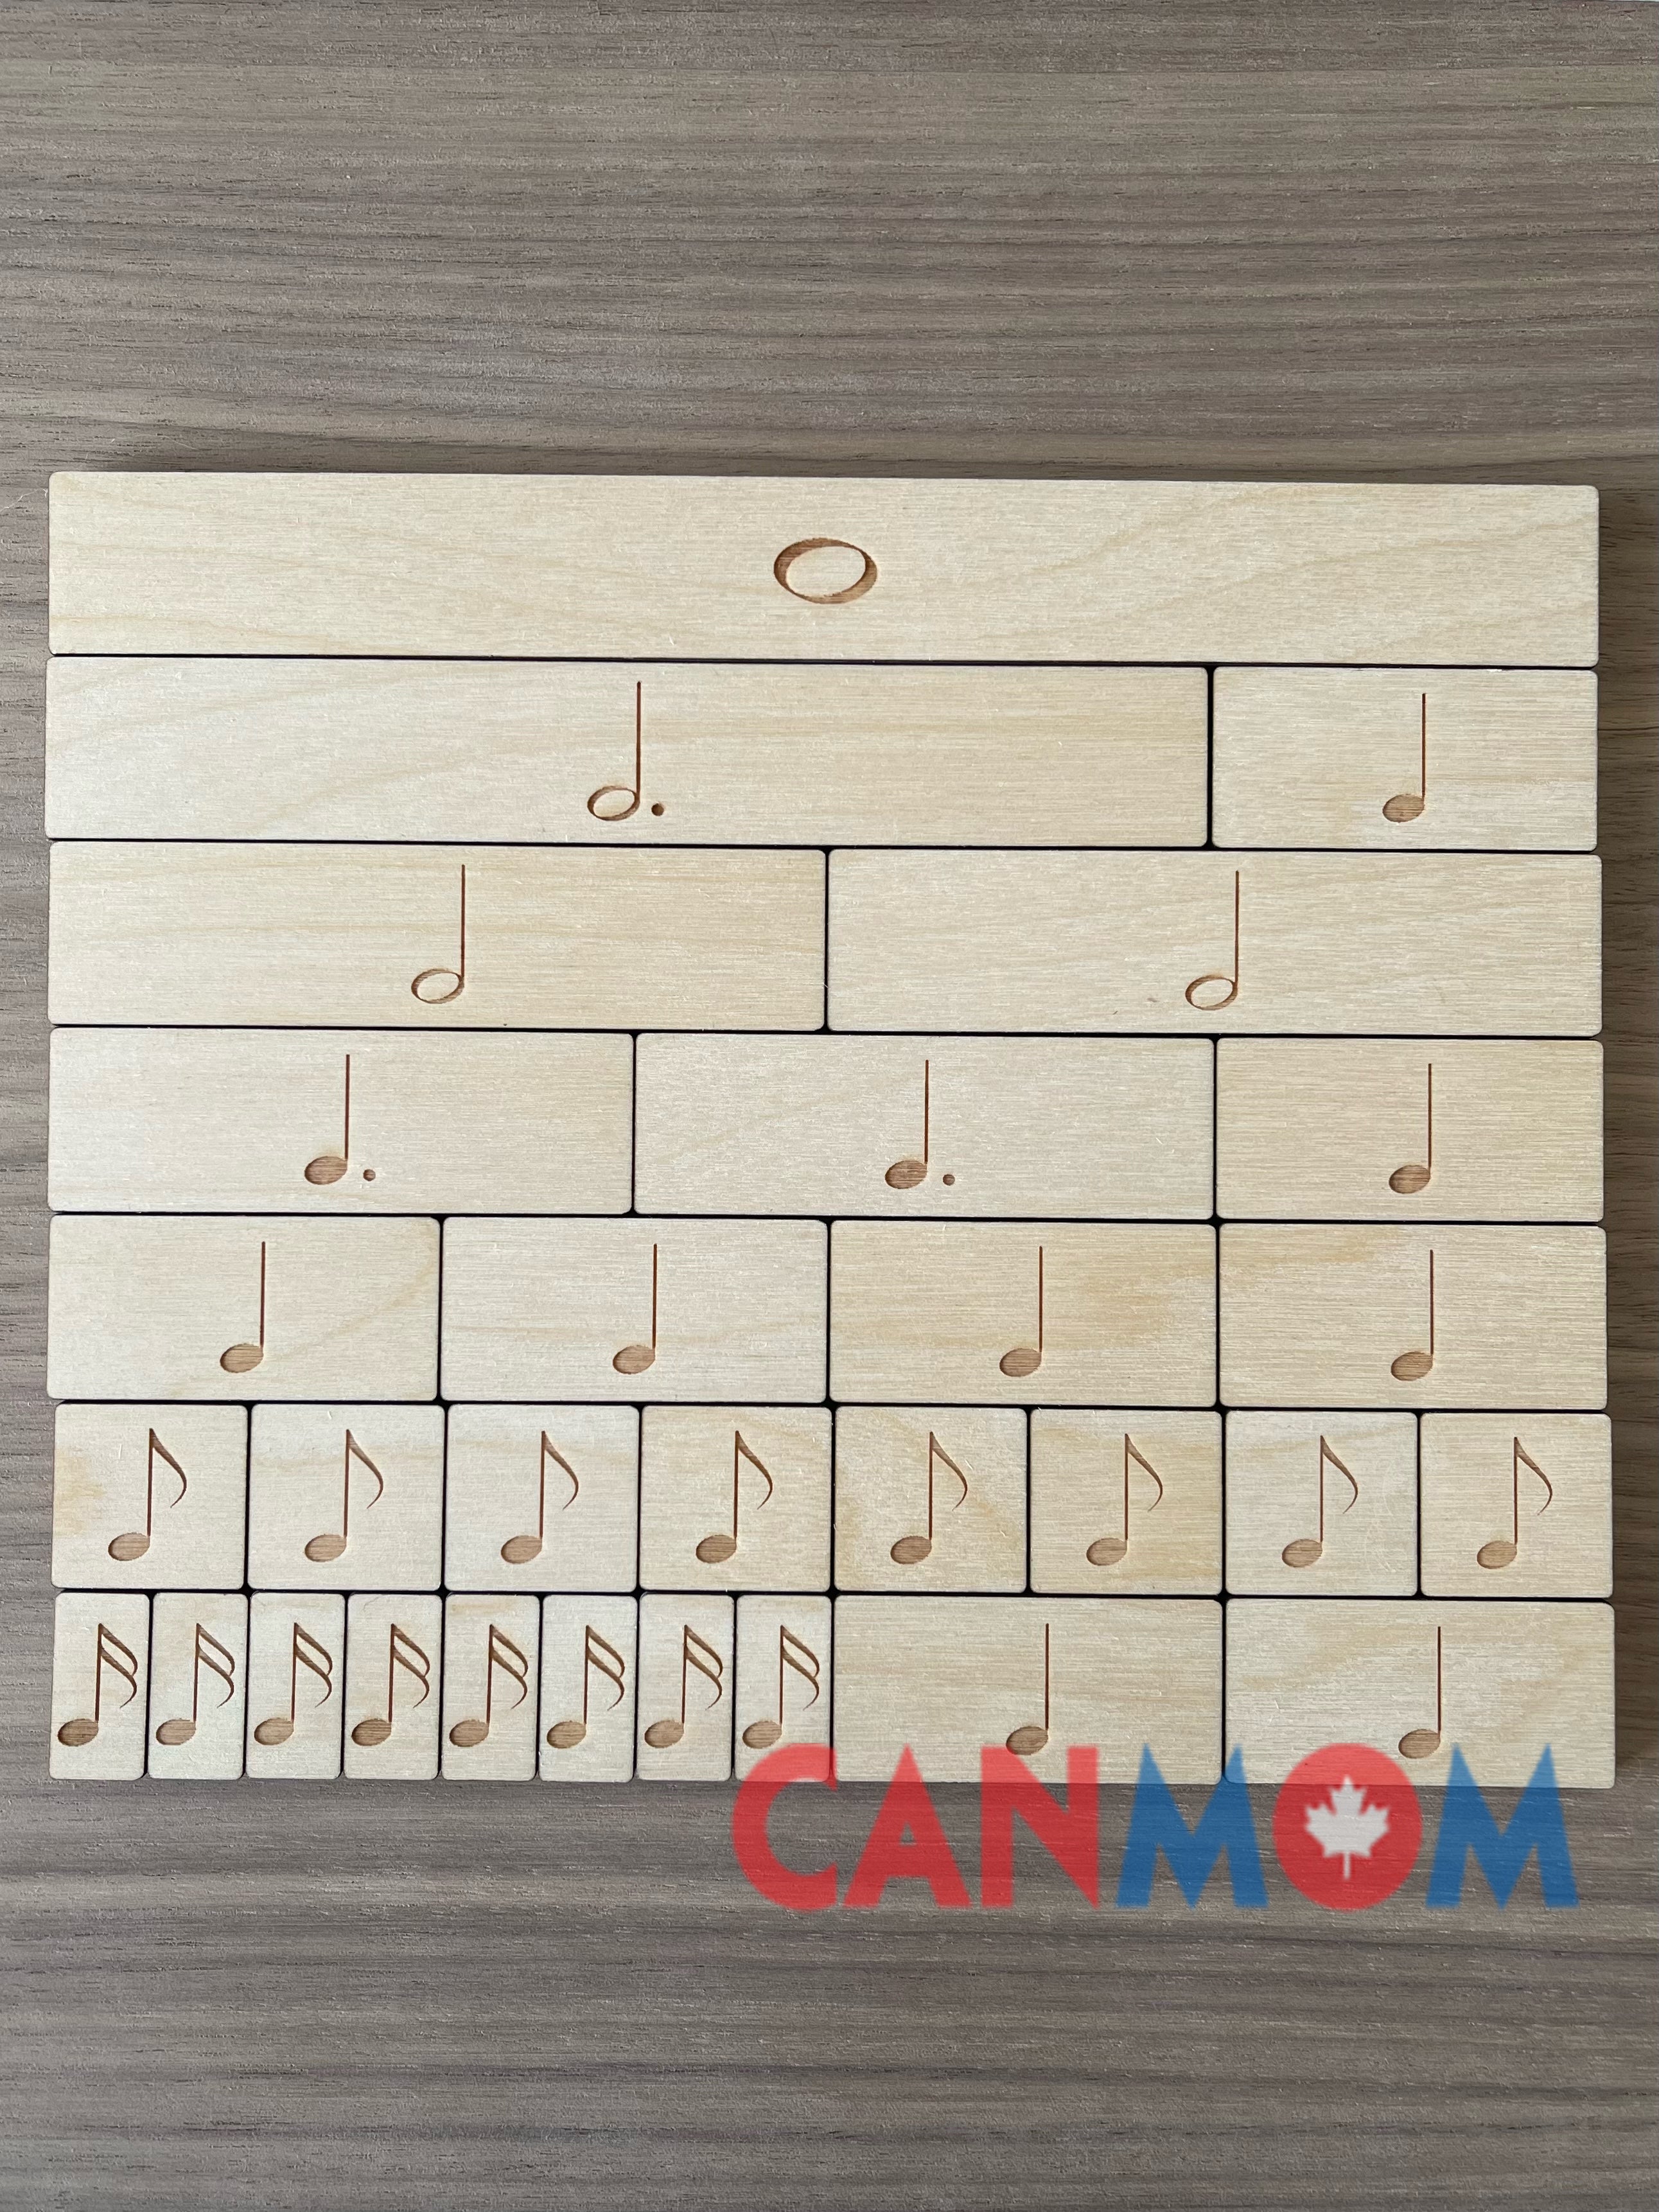 Montessori inspired music notes learning toy | Suzuki piano learning tools - two sided